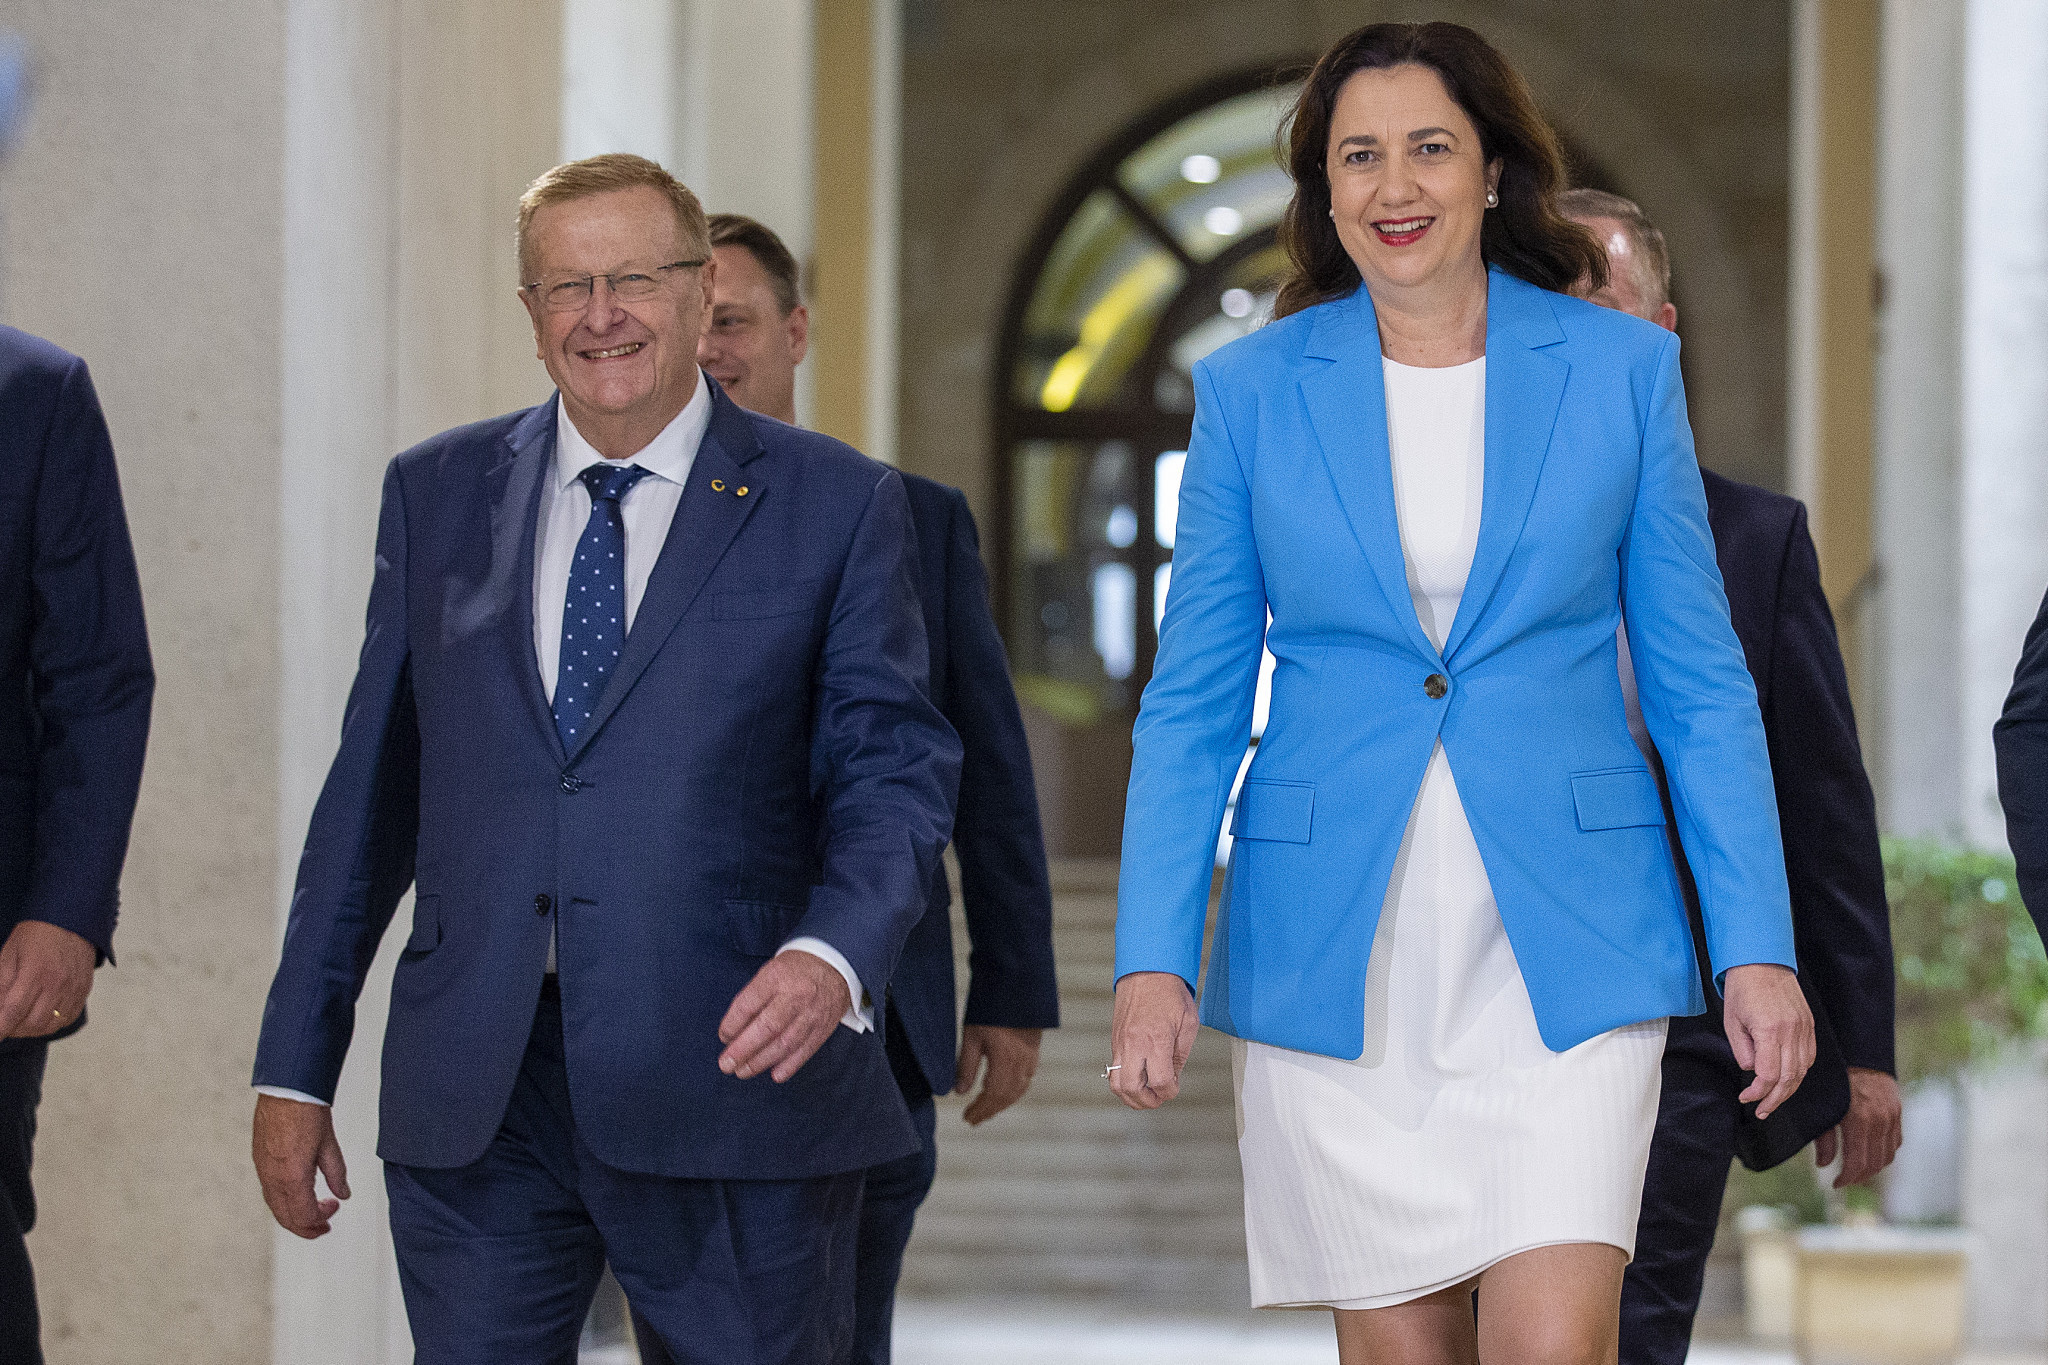 Queensland Premier Annastacia Palaszczuk, right, has submited priority guarantees to IOC President Thomas Bach ©Getty Images